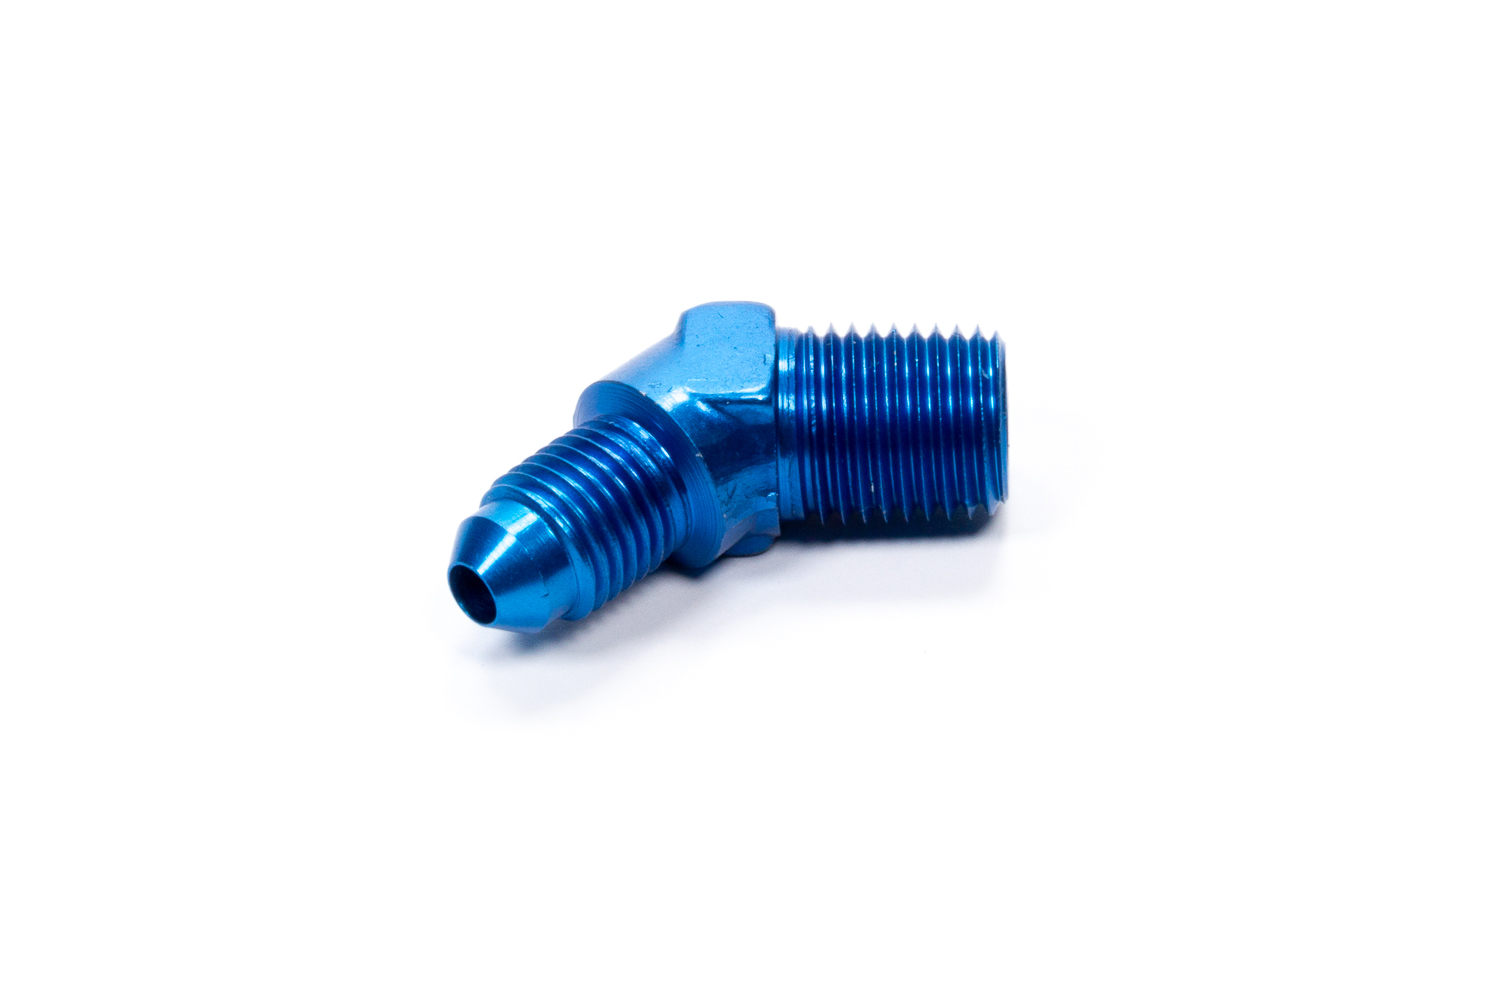 Fragola 482344 Fitting, Adapter, 45 Degree, 4 AN Male to 1/4 in NPT Male, Aluminum, Blue Anodized, Each